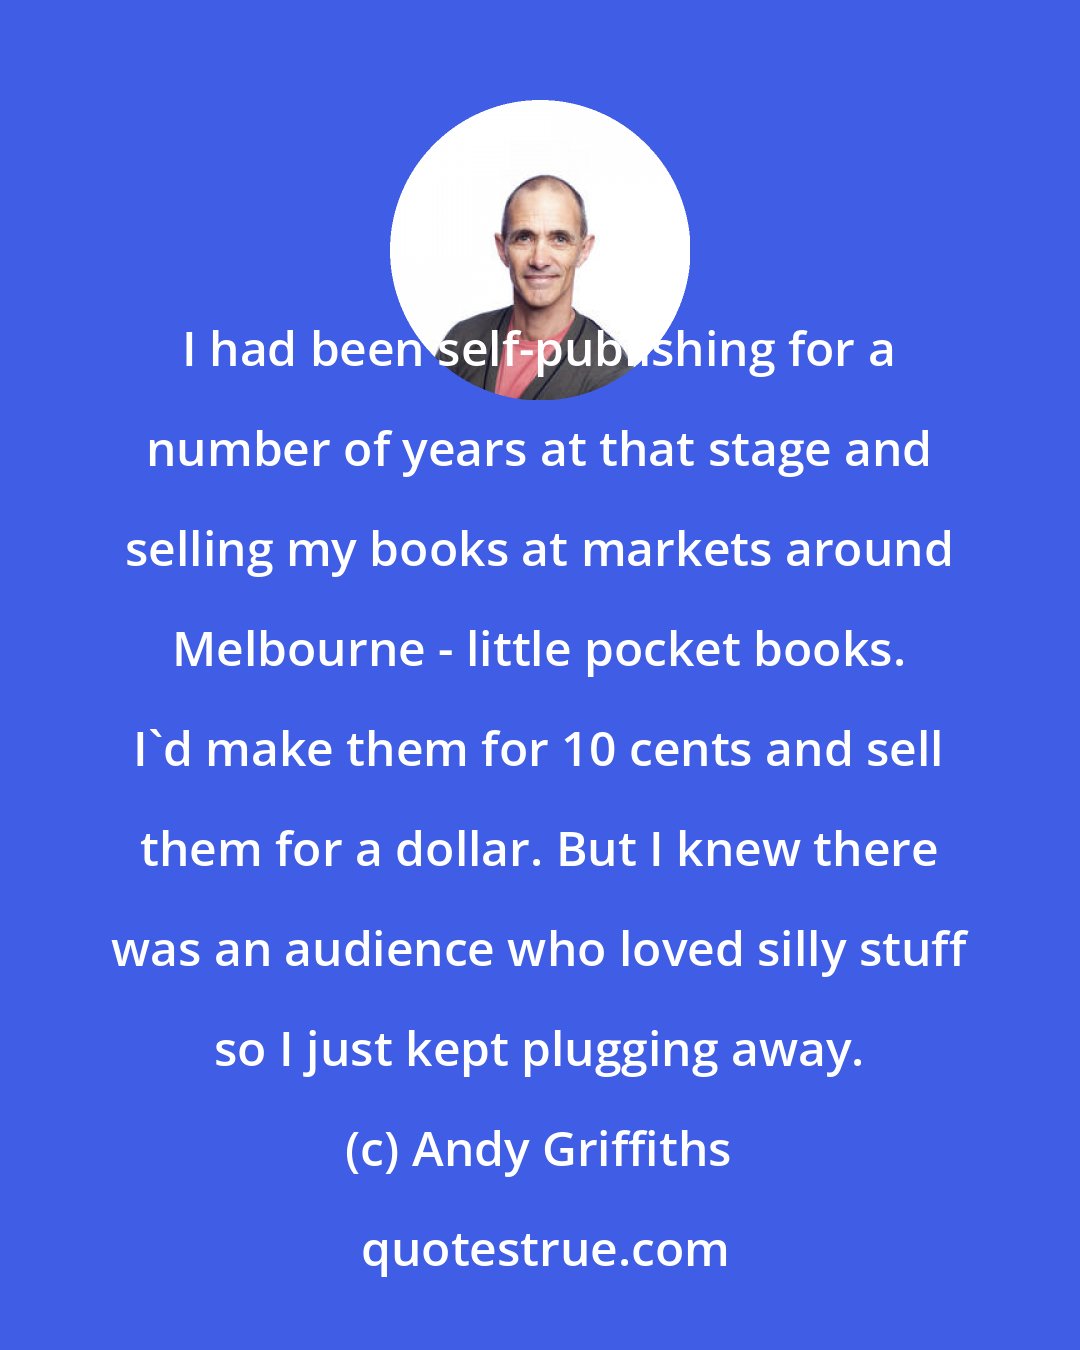 Andy Griffiths: I had been self-publishing for a number of years at that stage and selling my books at markets around Melbourne - little pocket books. I'd make them for 10 cents and sell them for a dollar. But I knew there was an audience who loved silly stuff so I just kept plugging away.